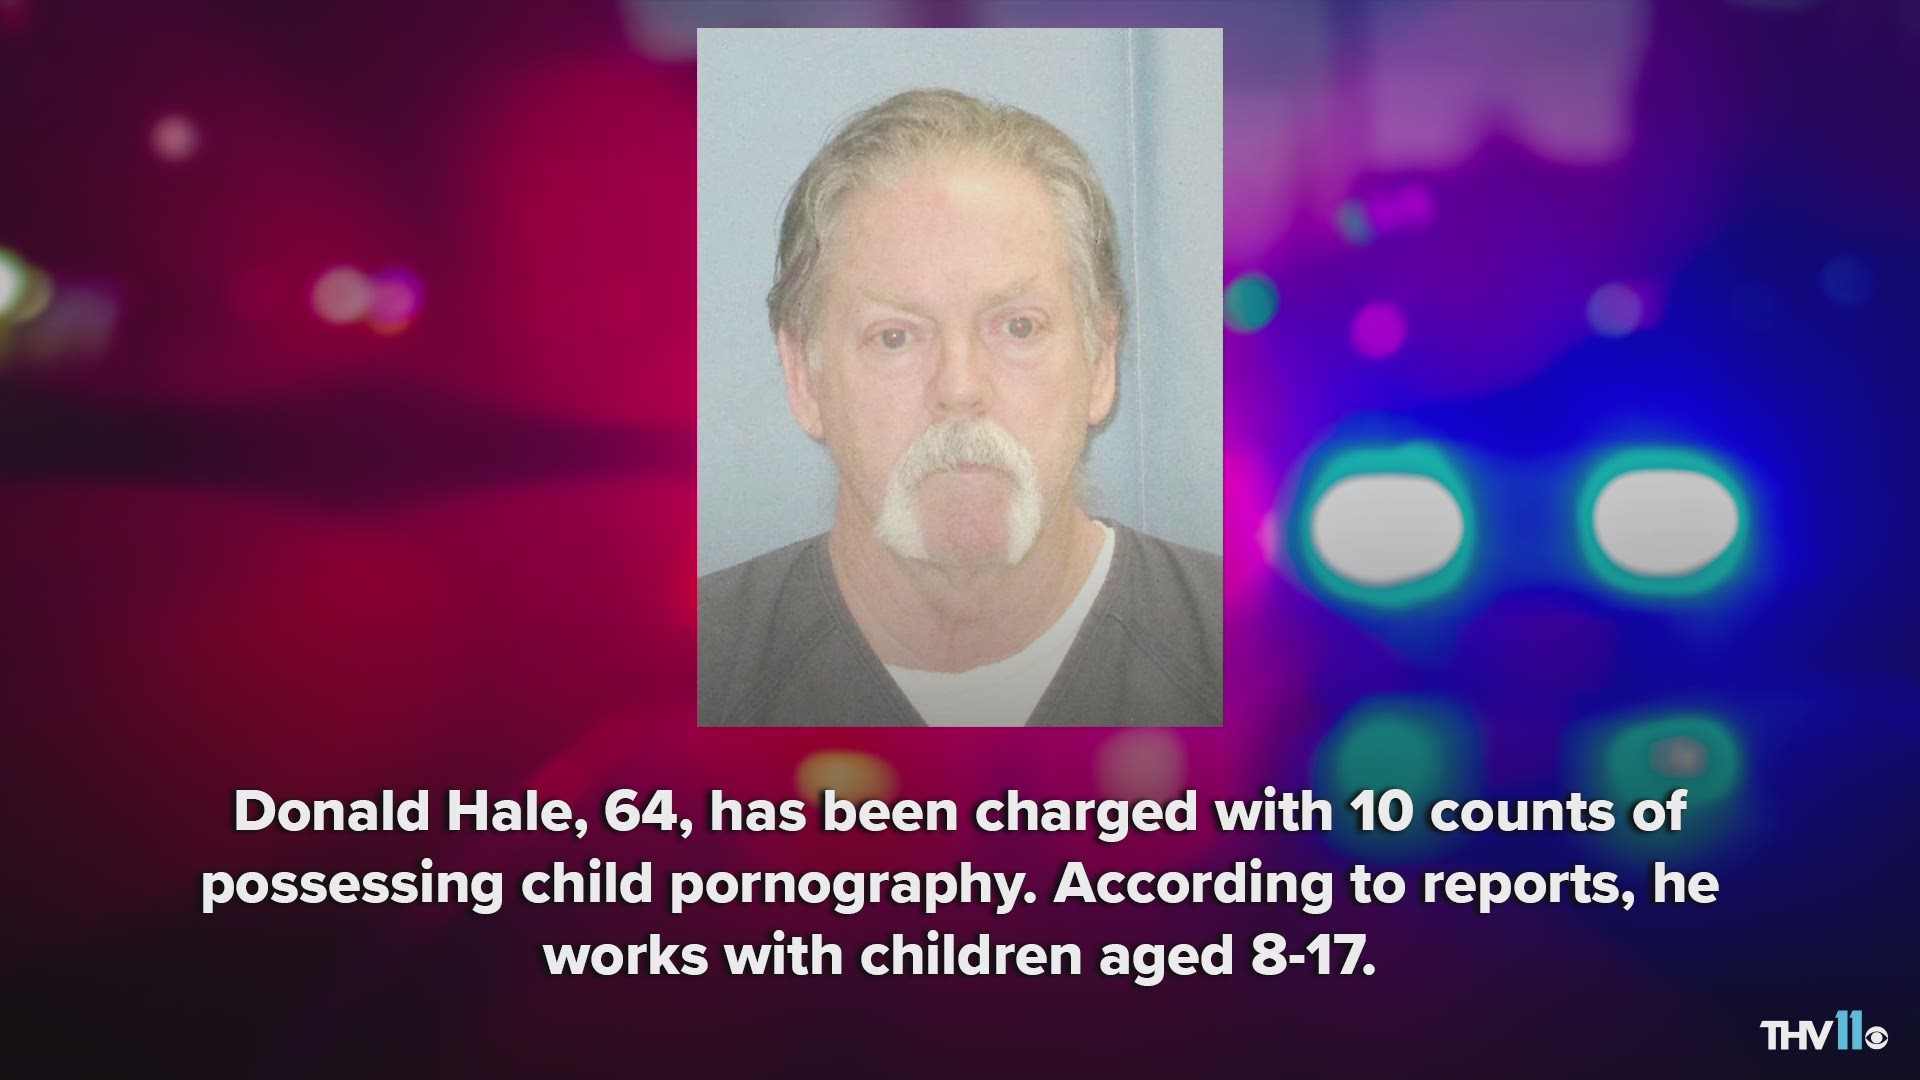 Donald Hale, 64, has been charged with 10 counts of possessing child pornography. According to reports, he works with children aged 8-17.